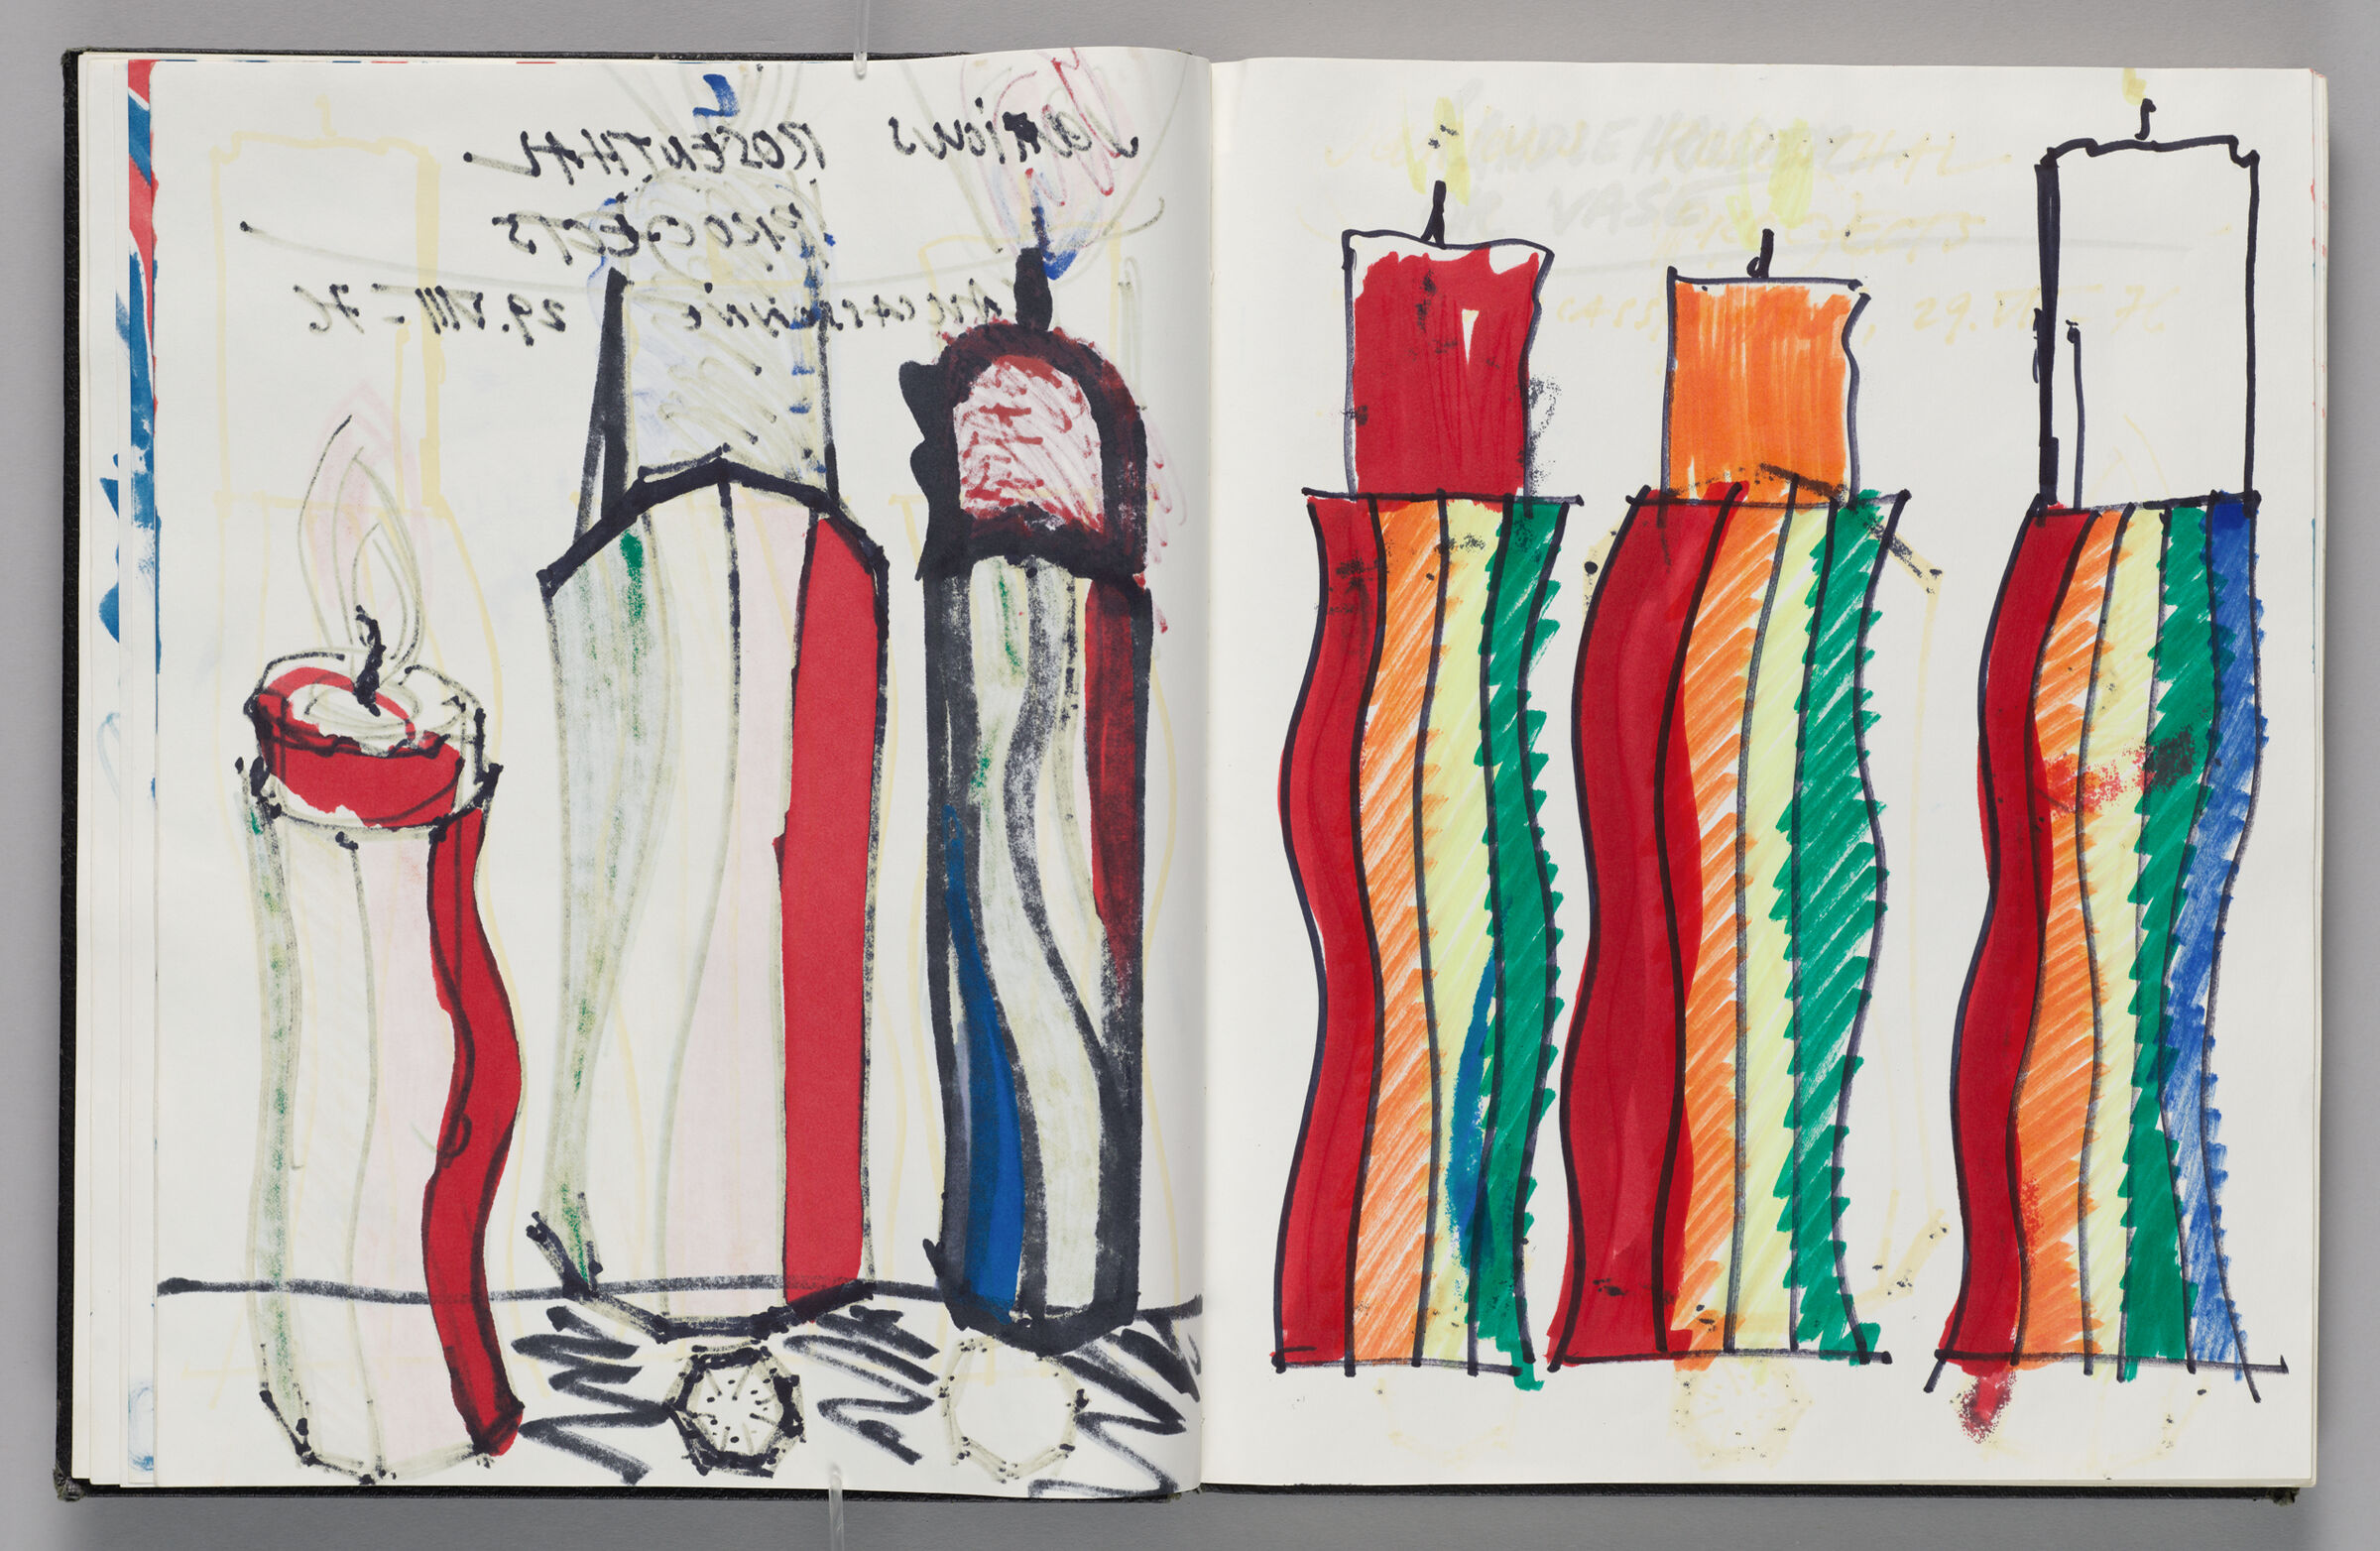 Untitled (Bleed-Through Of Previous Page, Left Page); Untitled (Rosenthal Candleholder Designs Atop Color Transfer, Right Page)